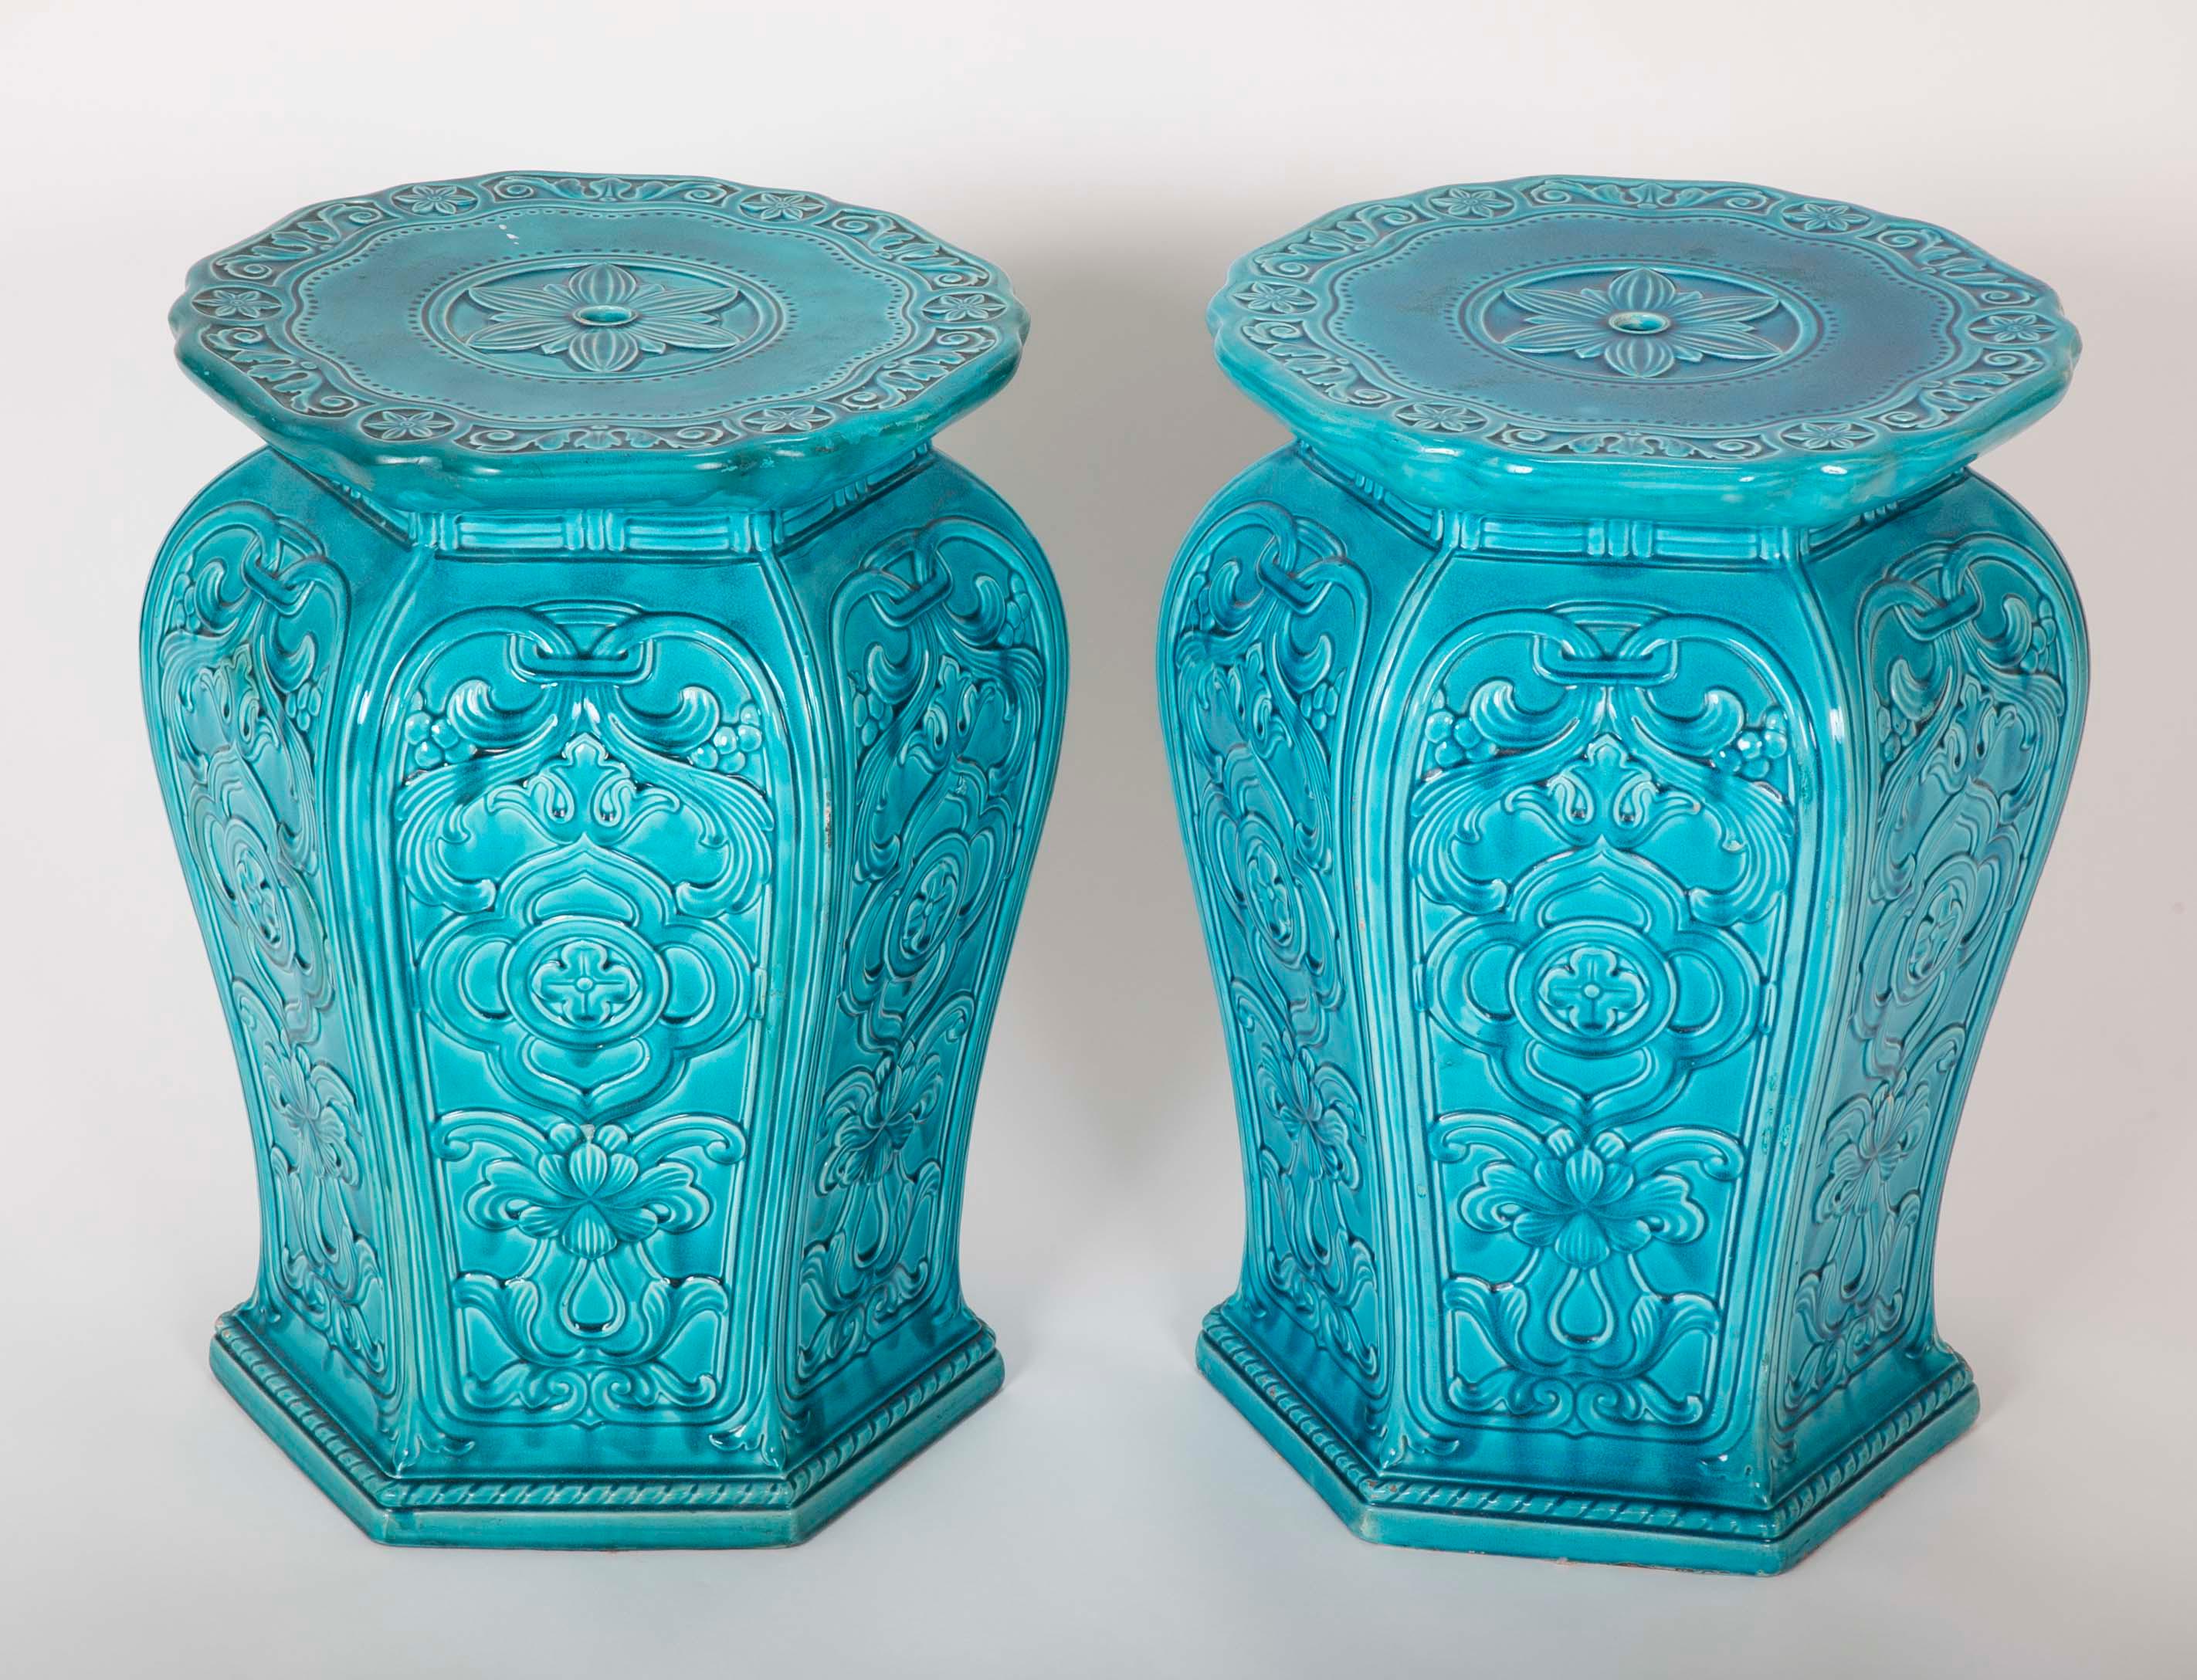 CC Home Furnishings 20 Decorative Glossy Turquoise Tobit Cut-Out Ceramic Garden Stool 